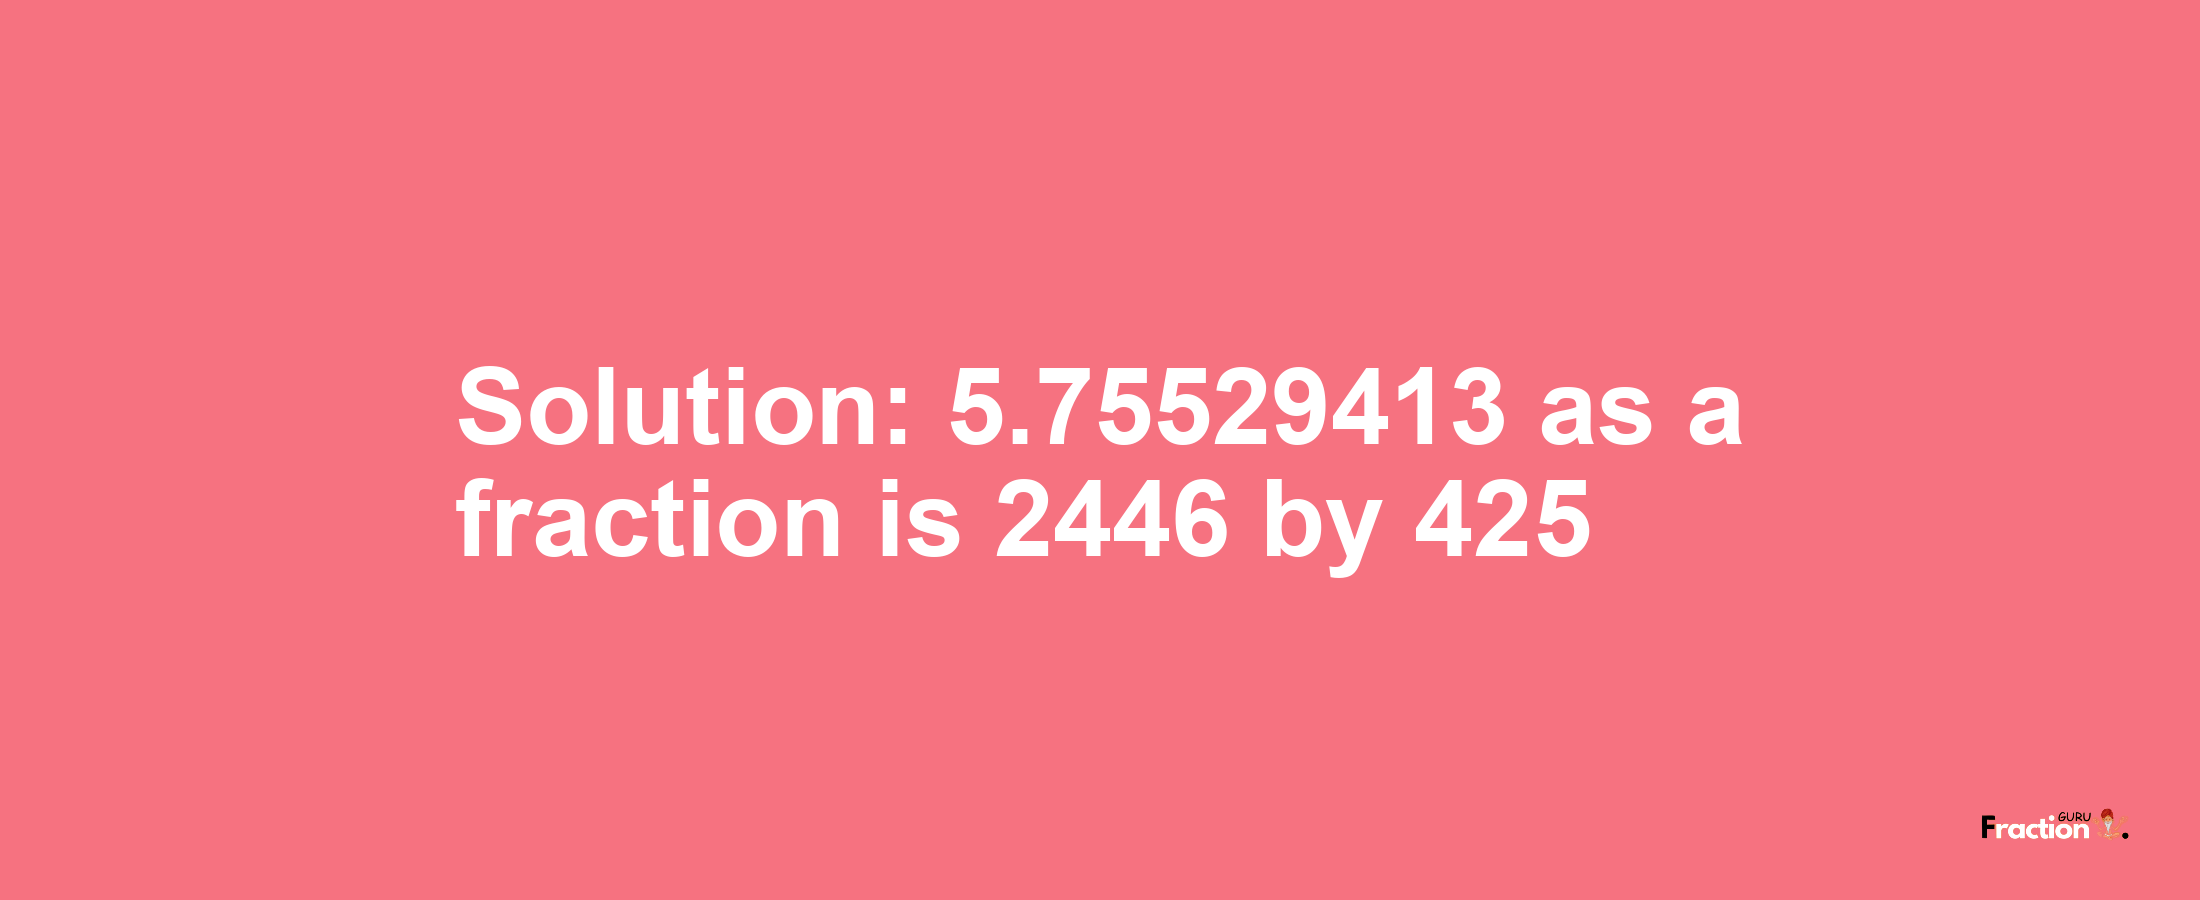 Solution:5.75529413 as a fraction is 2446/425